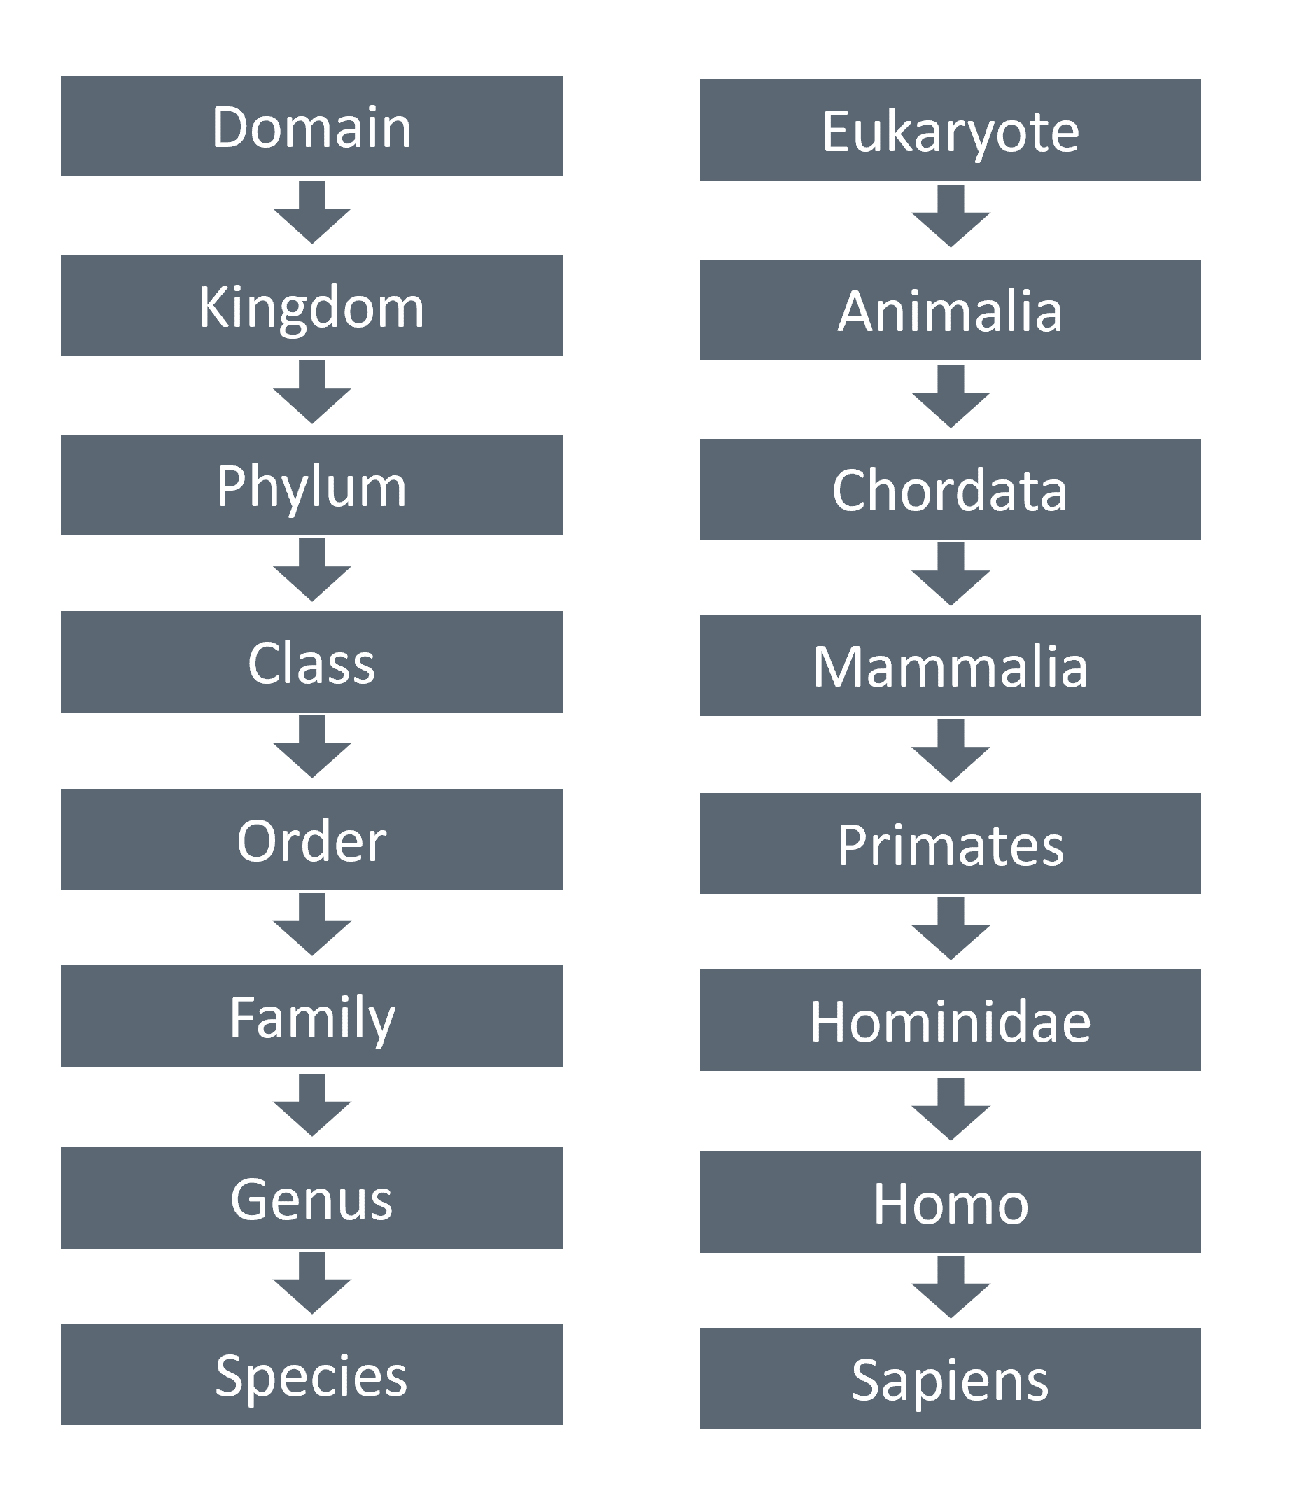 Image showing human classification using the modern hierarchy.